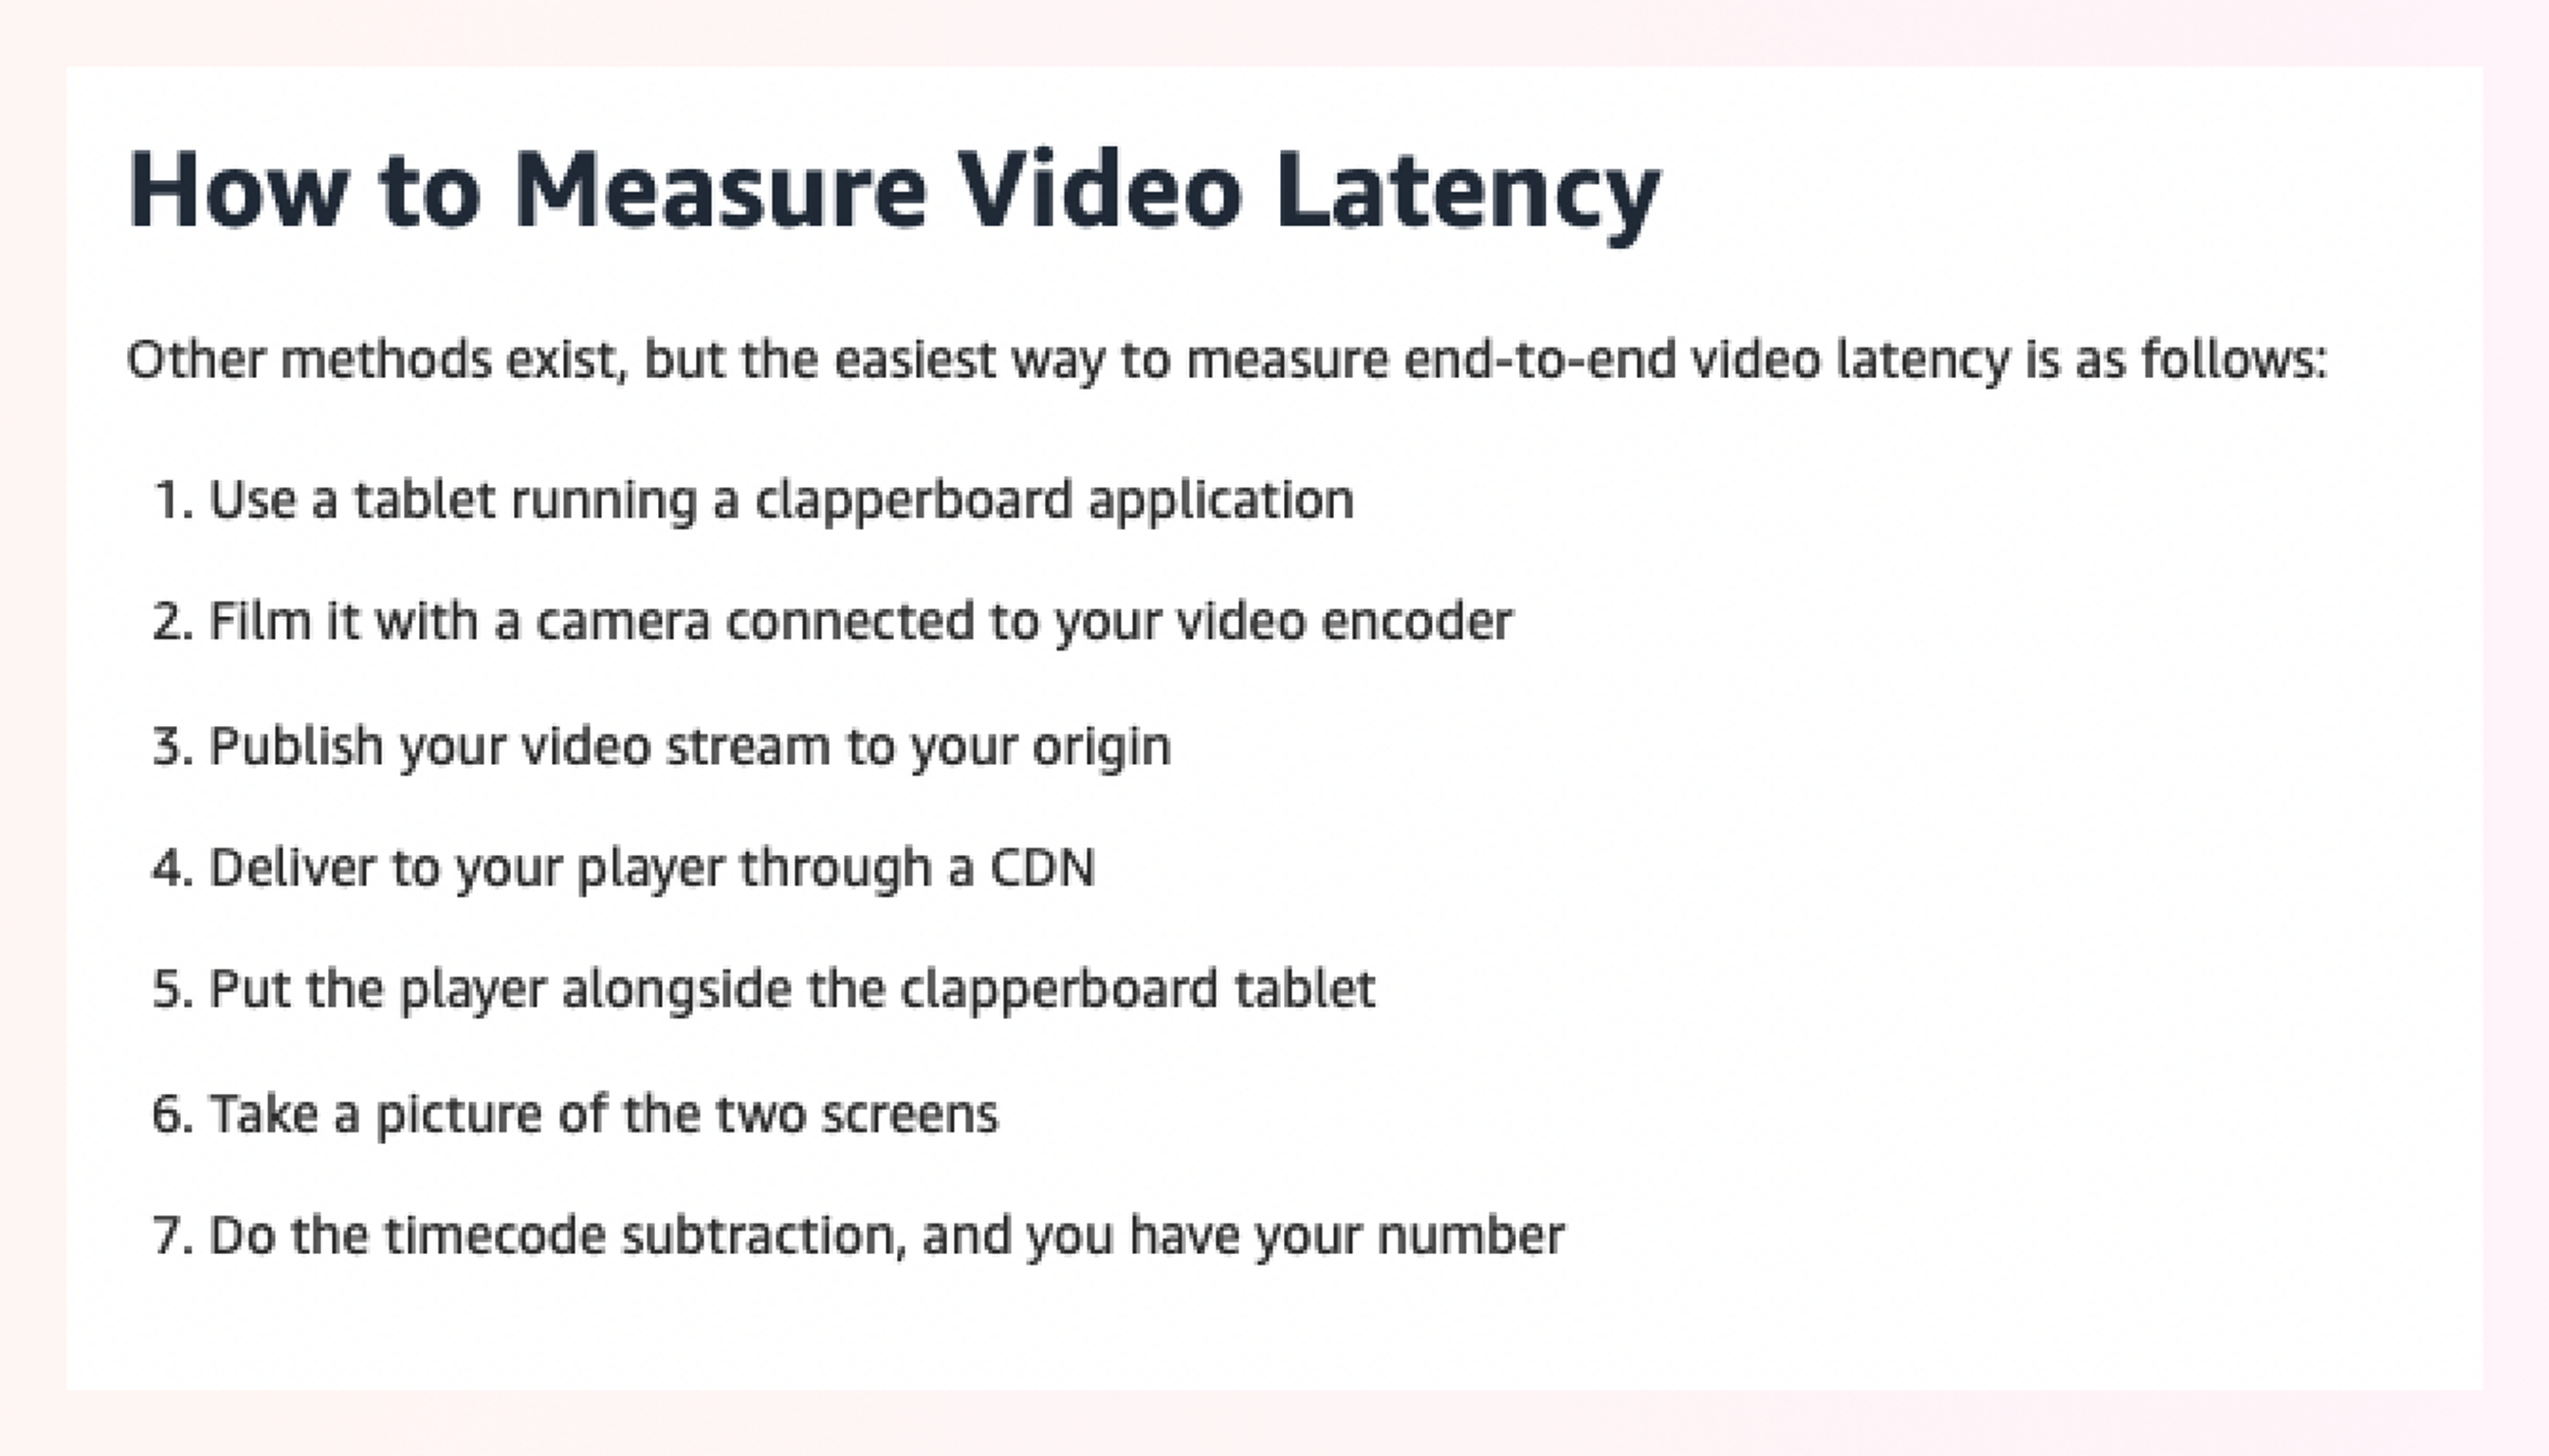 Image showing description of how to measure video latency using clapperboard application.